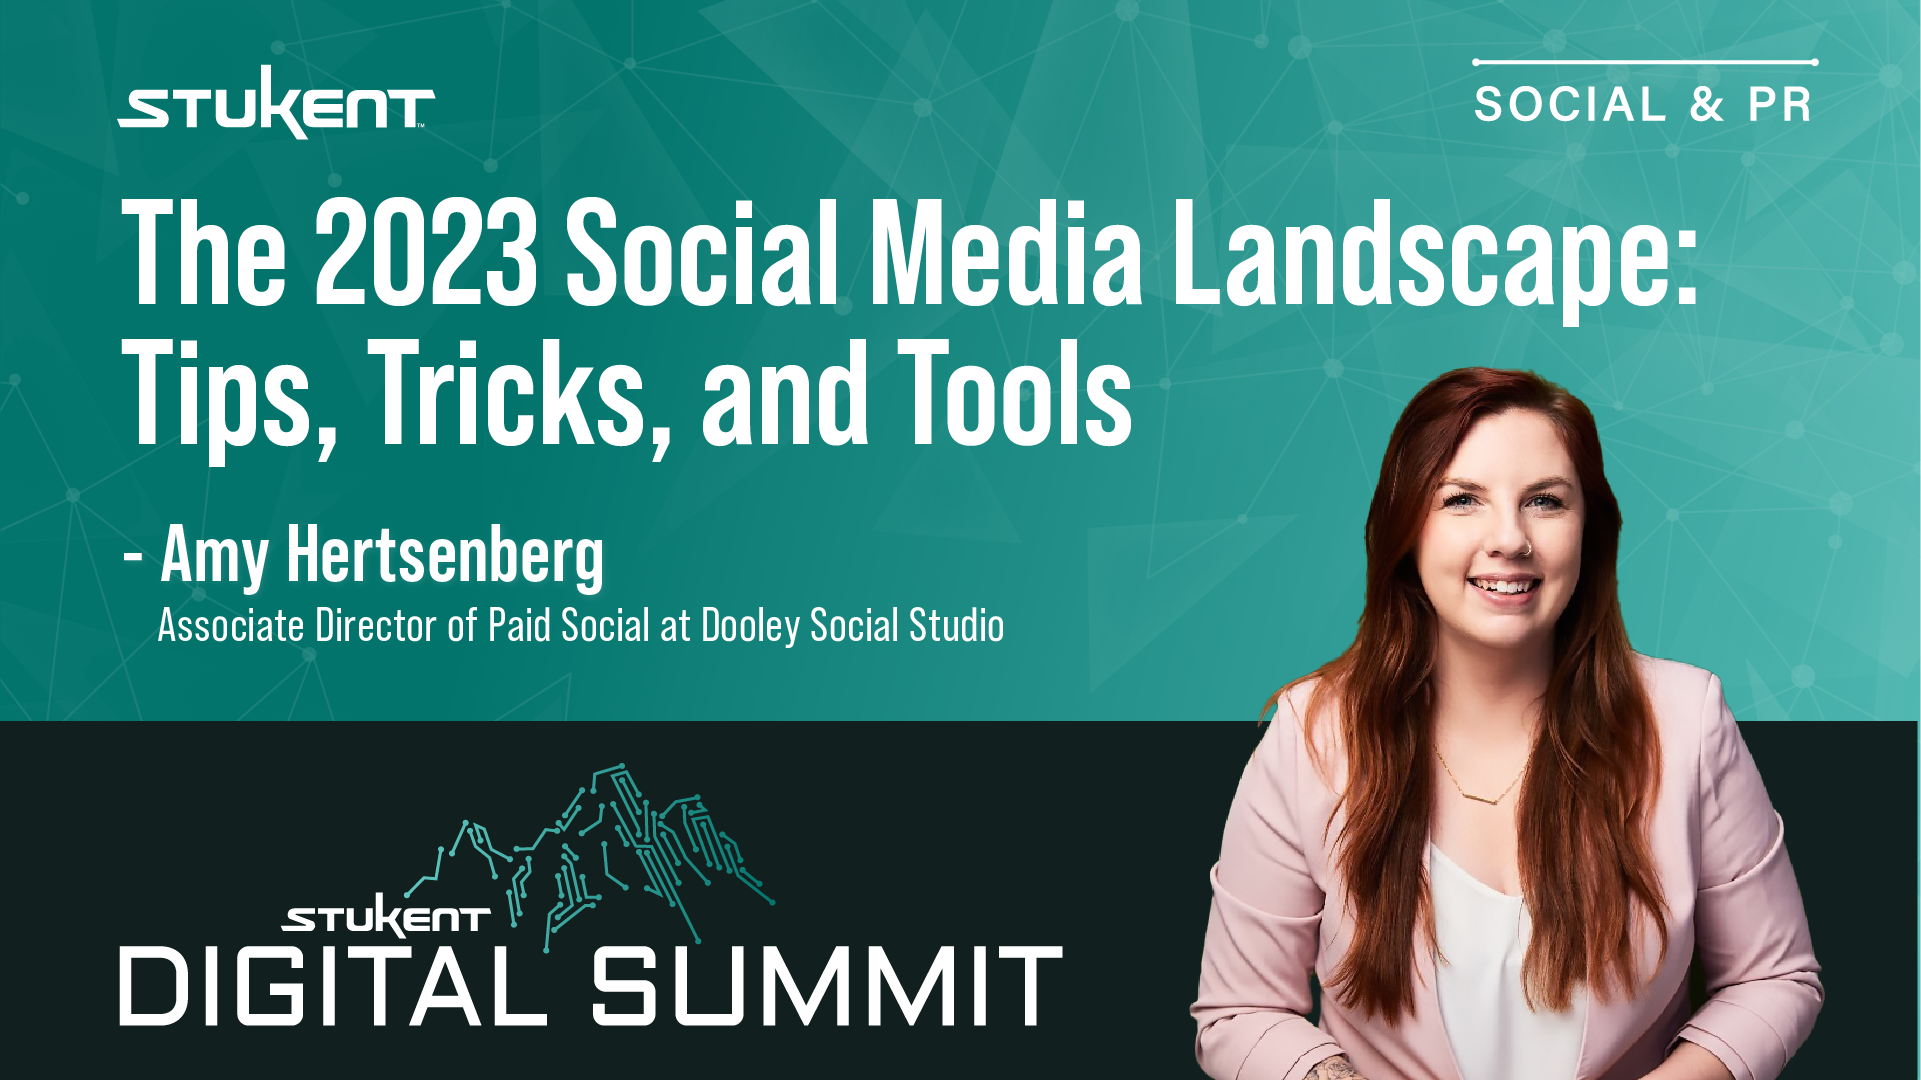 The 2023 Social Media Landscape: Tips, Tricks, and Tools